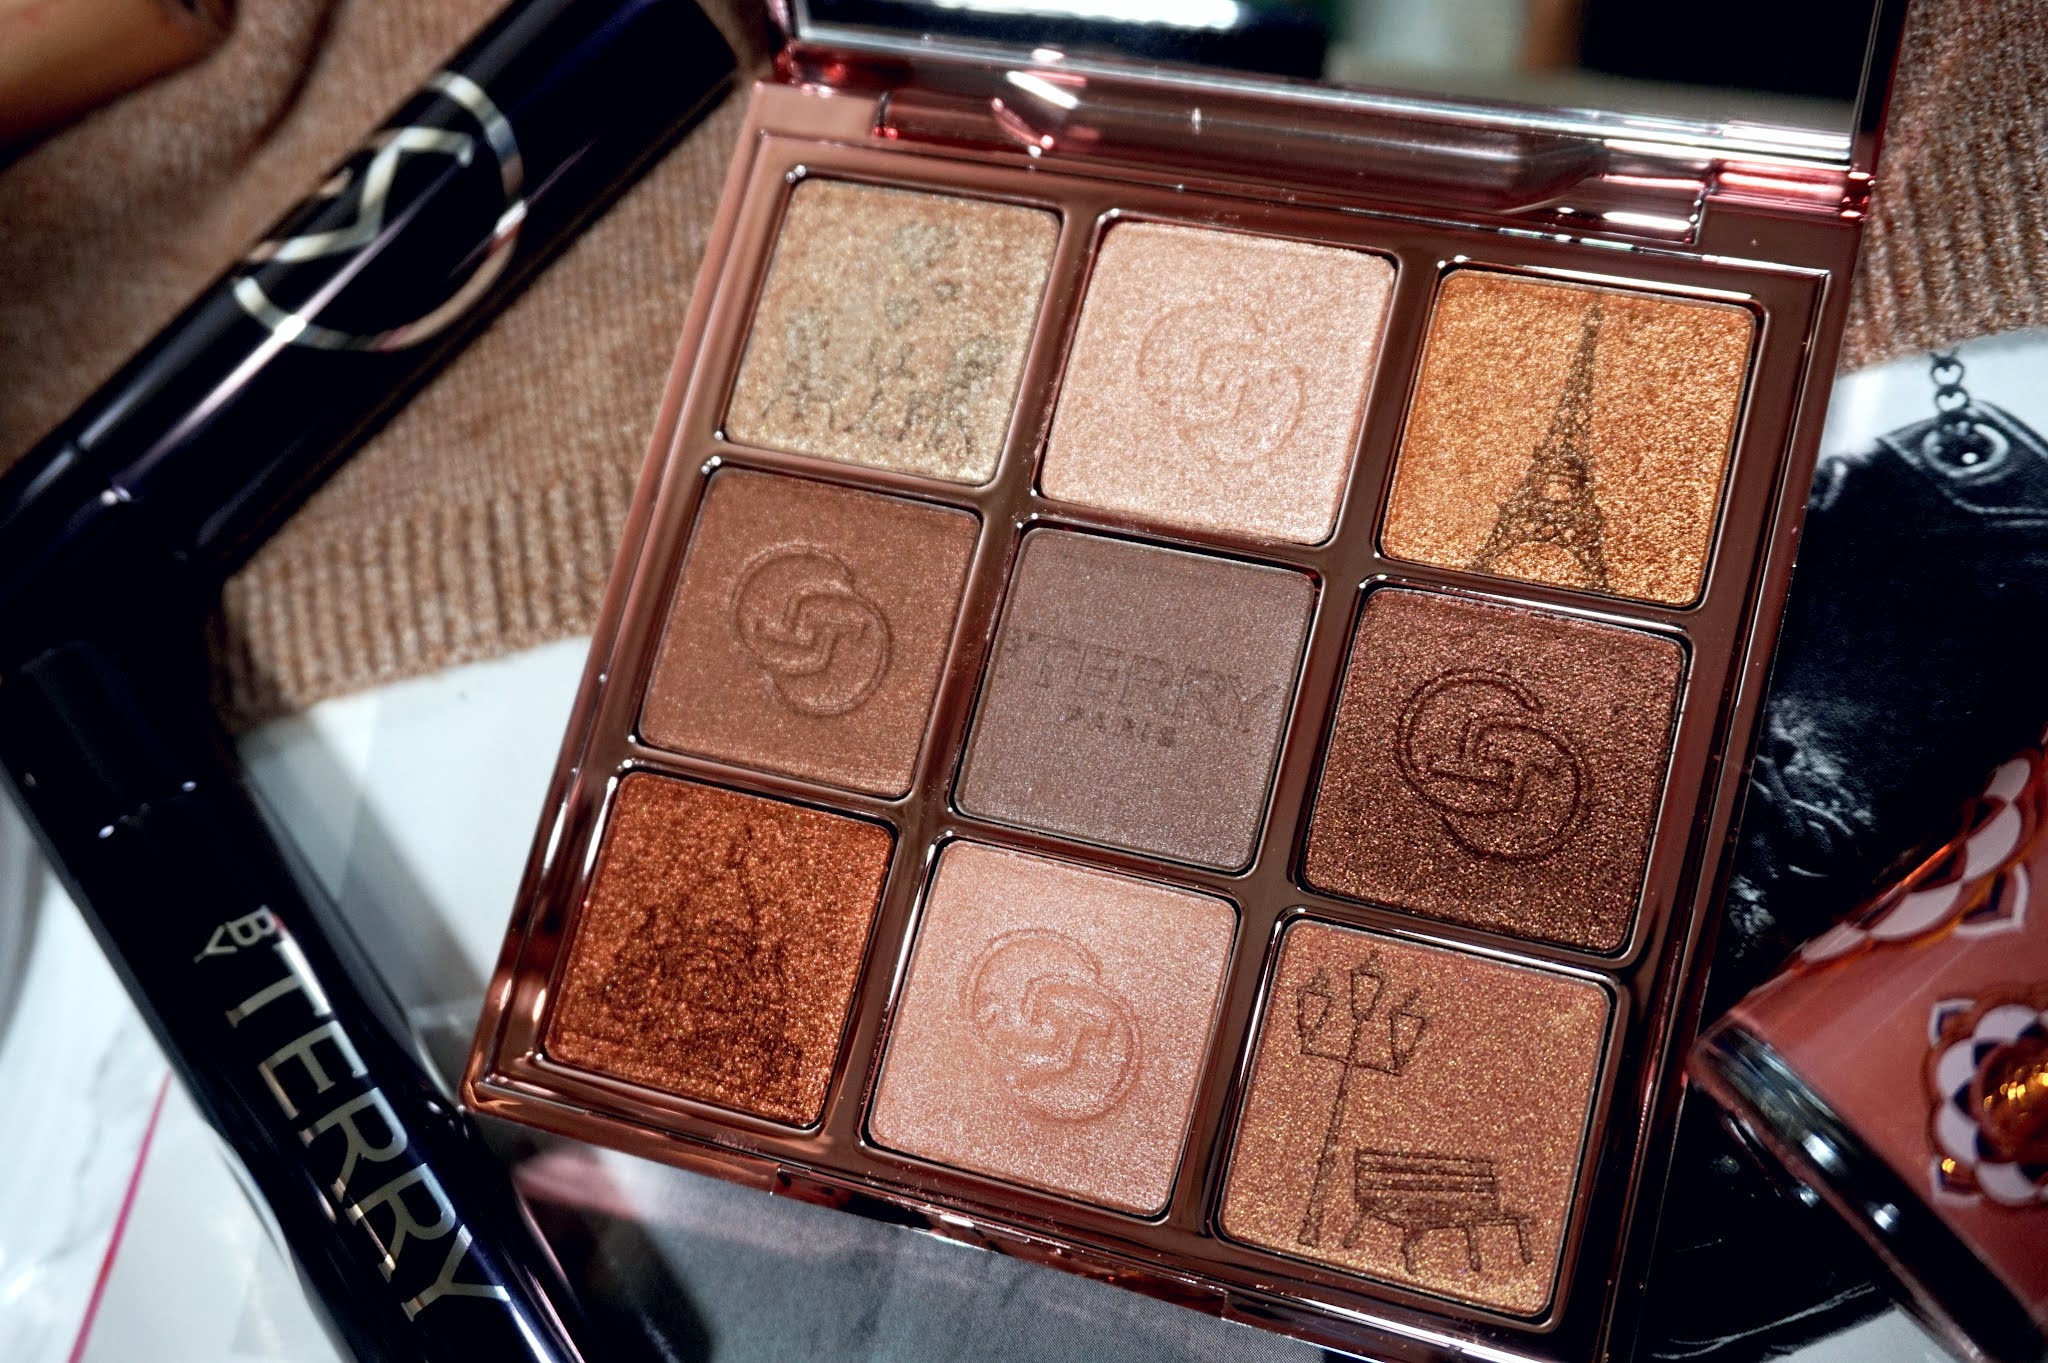 By Terry V.I.P. Expert Bonjour Paris Palette Review and Swatches